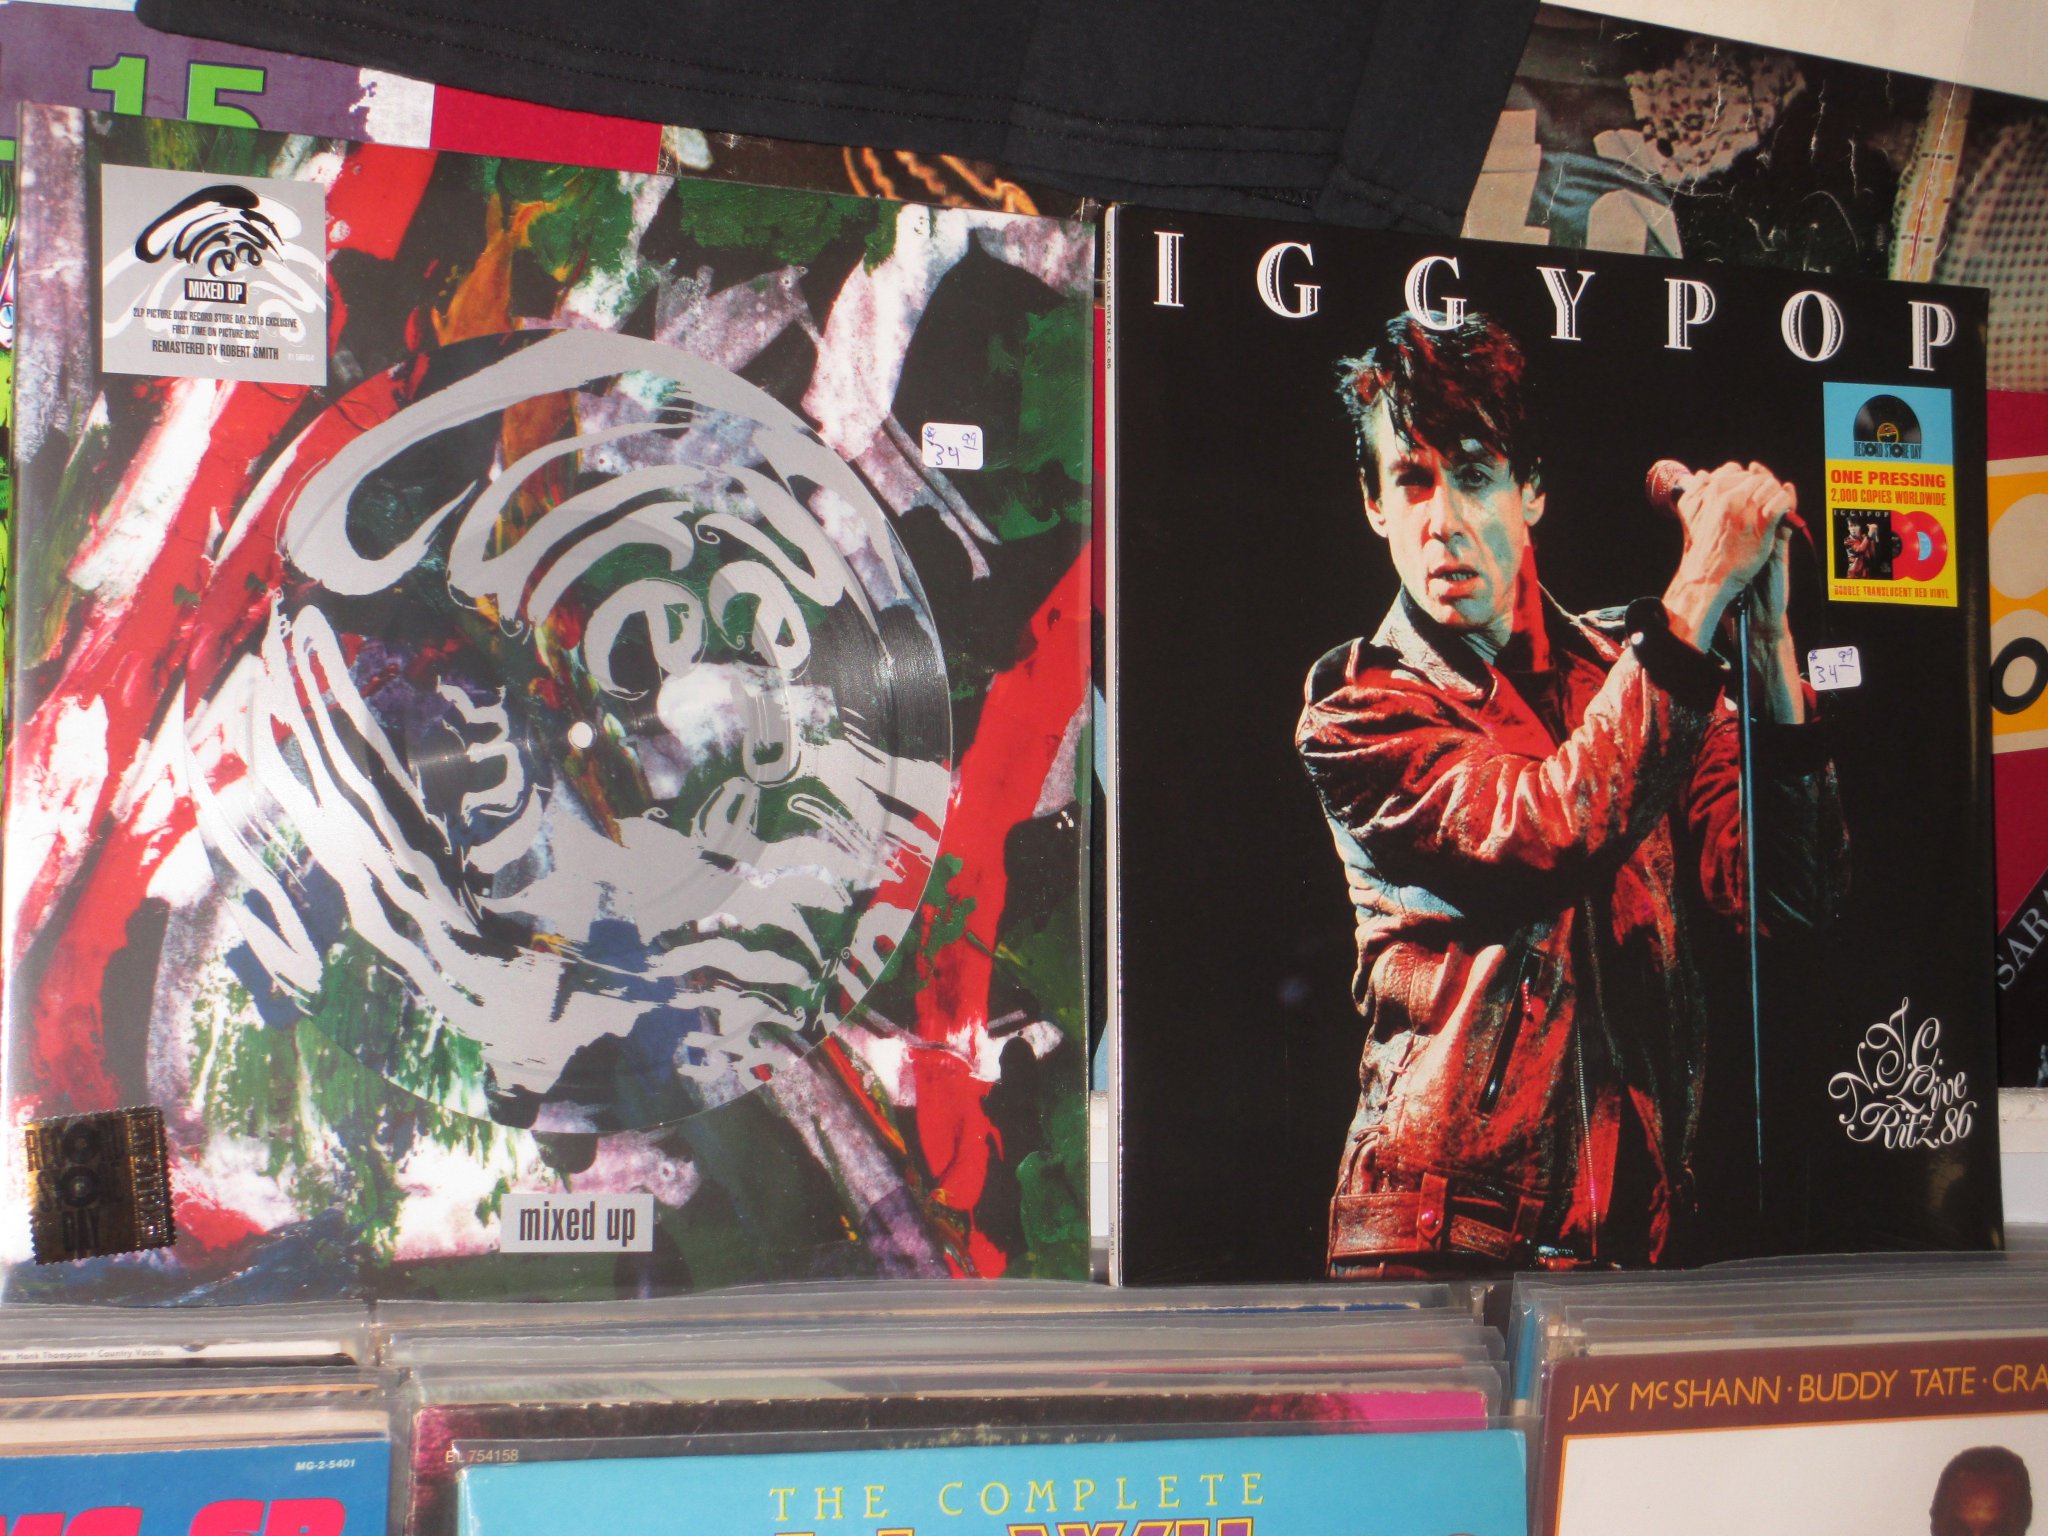 Happy Birthday to Robert Smith of the Cure & Iggy Pop 